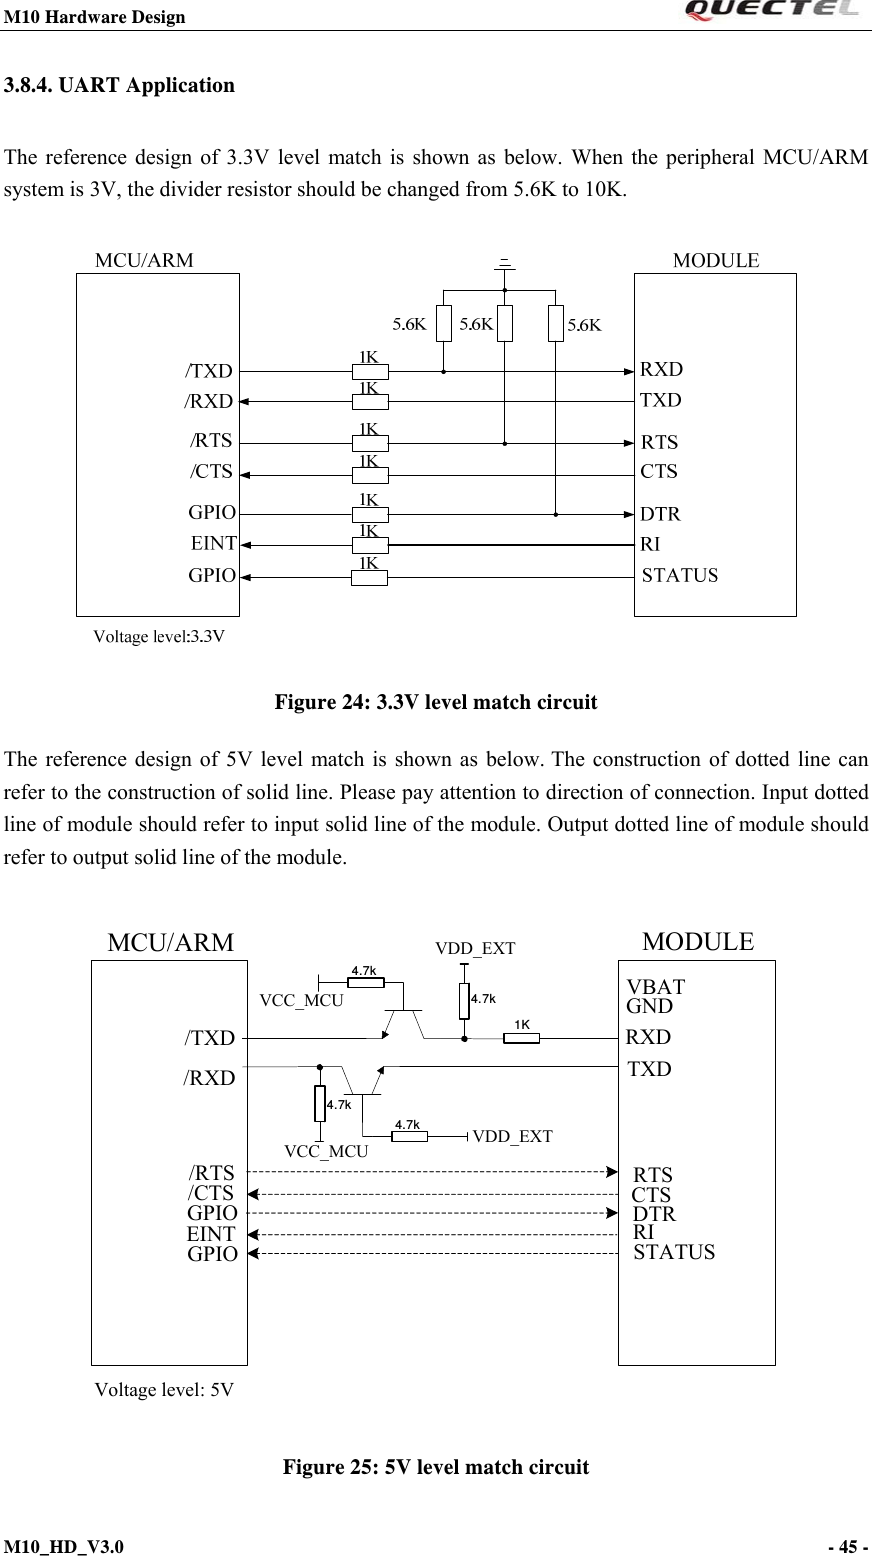 M10 Hardware Design                                                                 M10_HD_V3.0                                                                      - 45 -  3.8.4. UART Application The reference design of 3.3V level match is shown as below. When the peripheral MCU/ARM system is 3V, the divider resistor should be changed from 5.6K to 10K.   Figure 24: 3.3V level match circuit The reference design of 5V level match is shown as below. The construction of dotted line can refer to the construction of solid line. Please pay attention to direction of connection. Input dotted line of module should refer to input solid line of the module. Output dotted line of module should refer to output solid line of the module.  MCU/ARM/TXD/RXD1KVDD_EXT4.7kVCC_MCU4.7k4.7k4.7kVDD_EXTTXDRXDRTSCTSDTRRI/RTS/CTSGNDVBATGPIO STATUSMODULEGPIOEINTVCC_MCUVoltage level: 5V  Figure 25: 5V level match circuit 